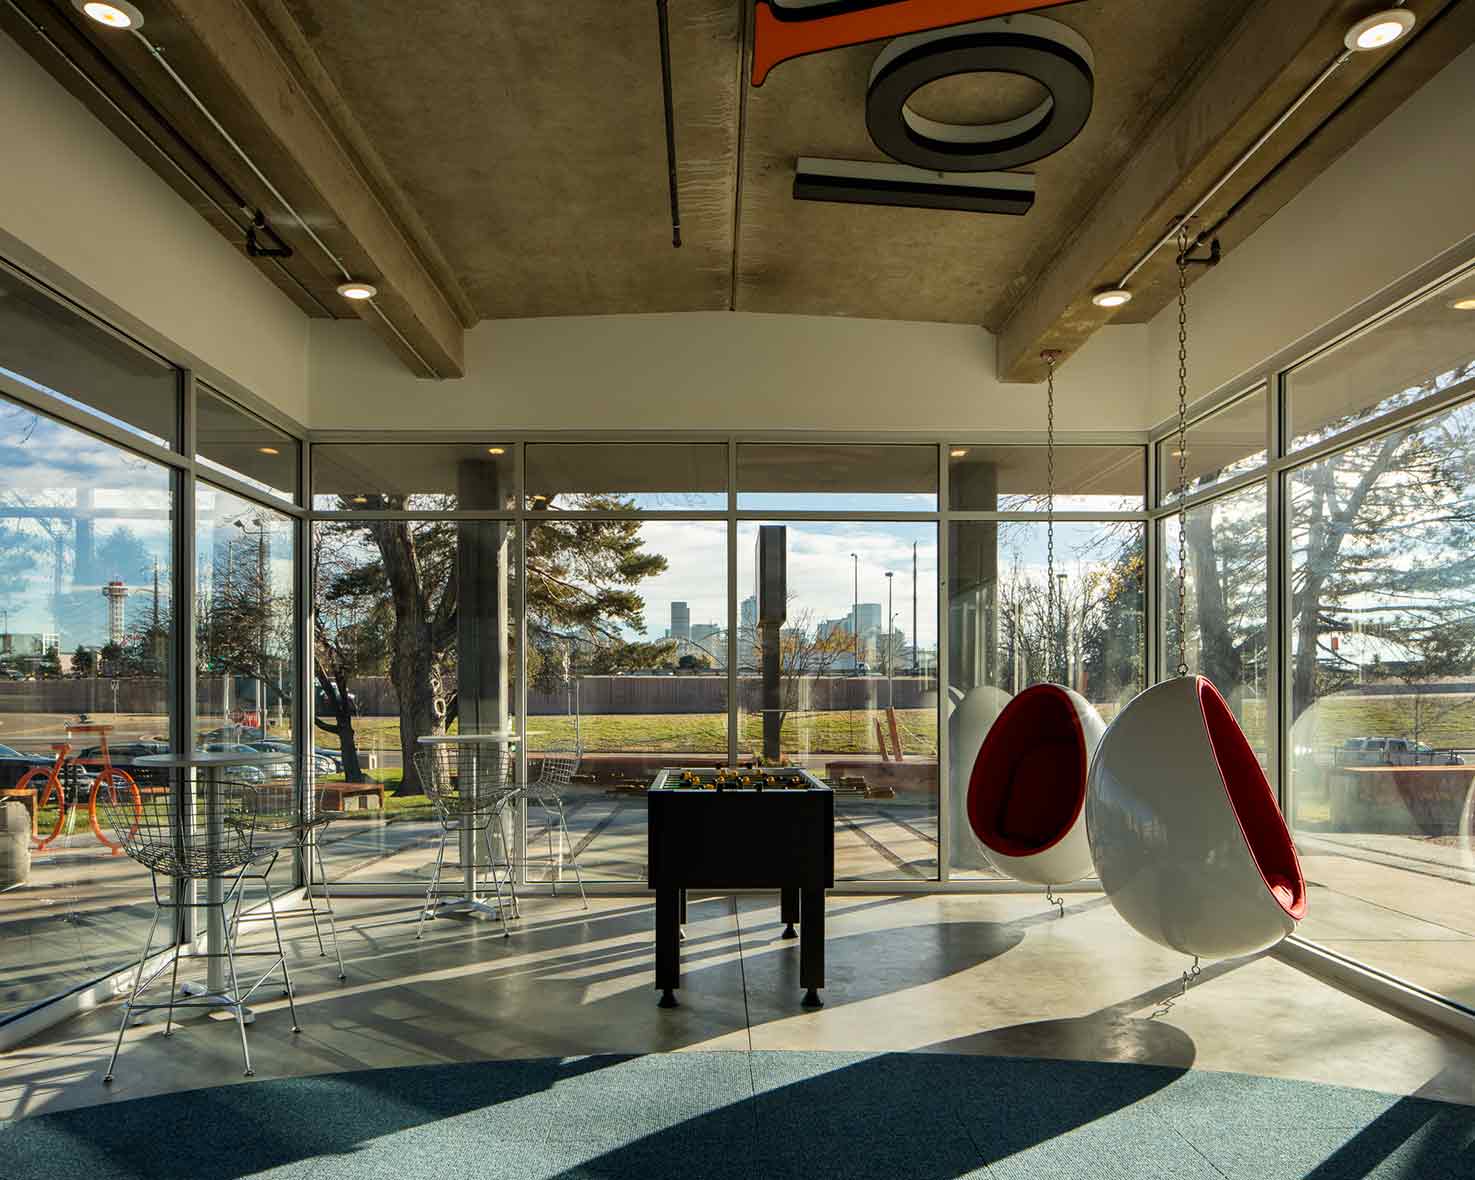 Turntable Studios Interior Entrance Game Room With Denver Skyline View